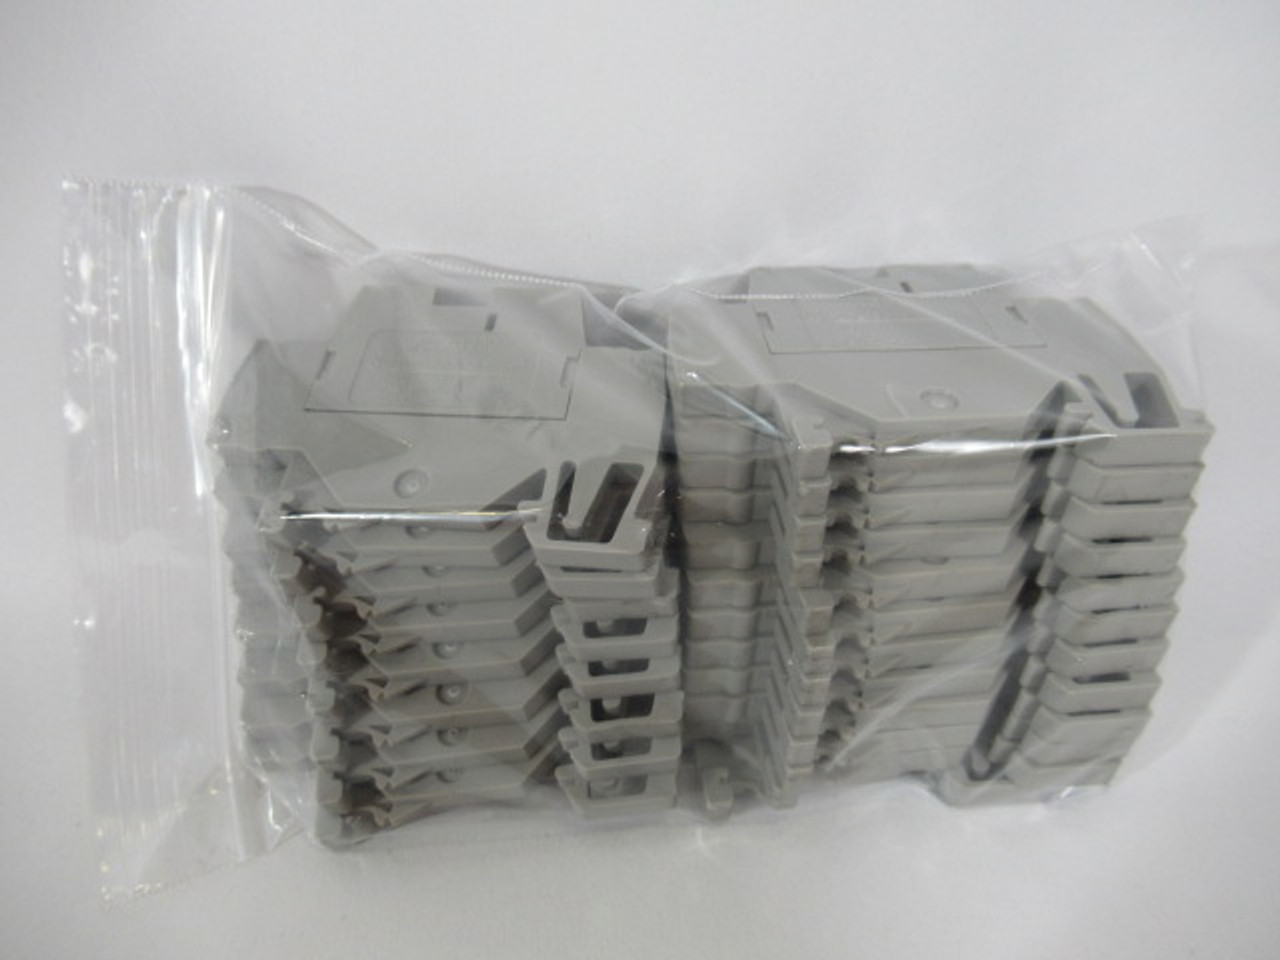 WAGO 280-514 Terminal Block 20A 500V 2.5mm Lot of 20 USED